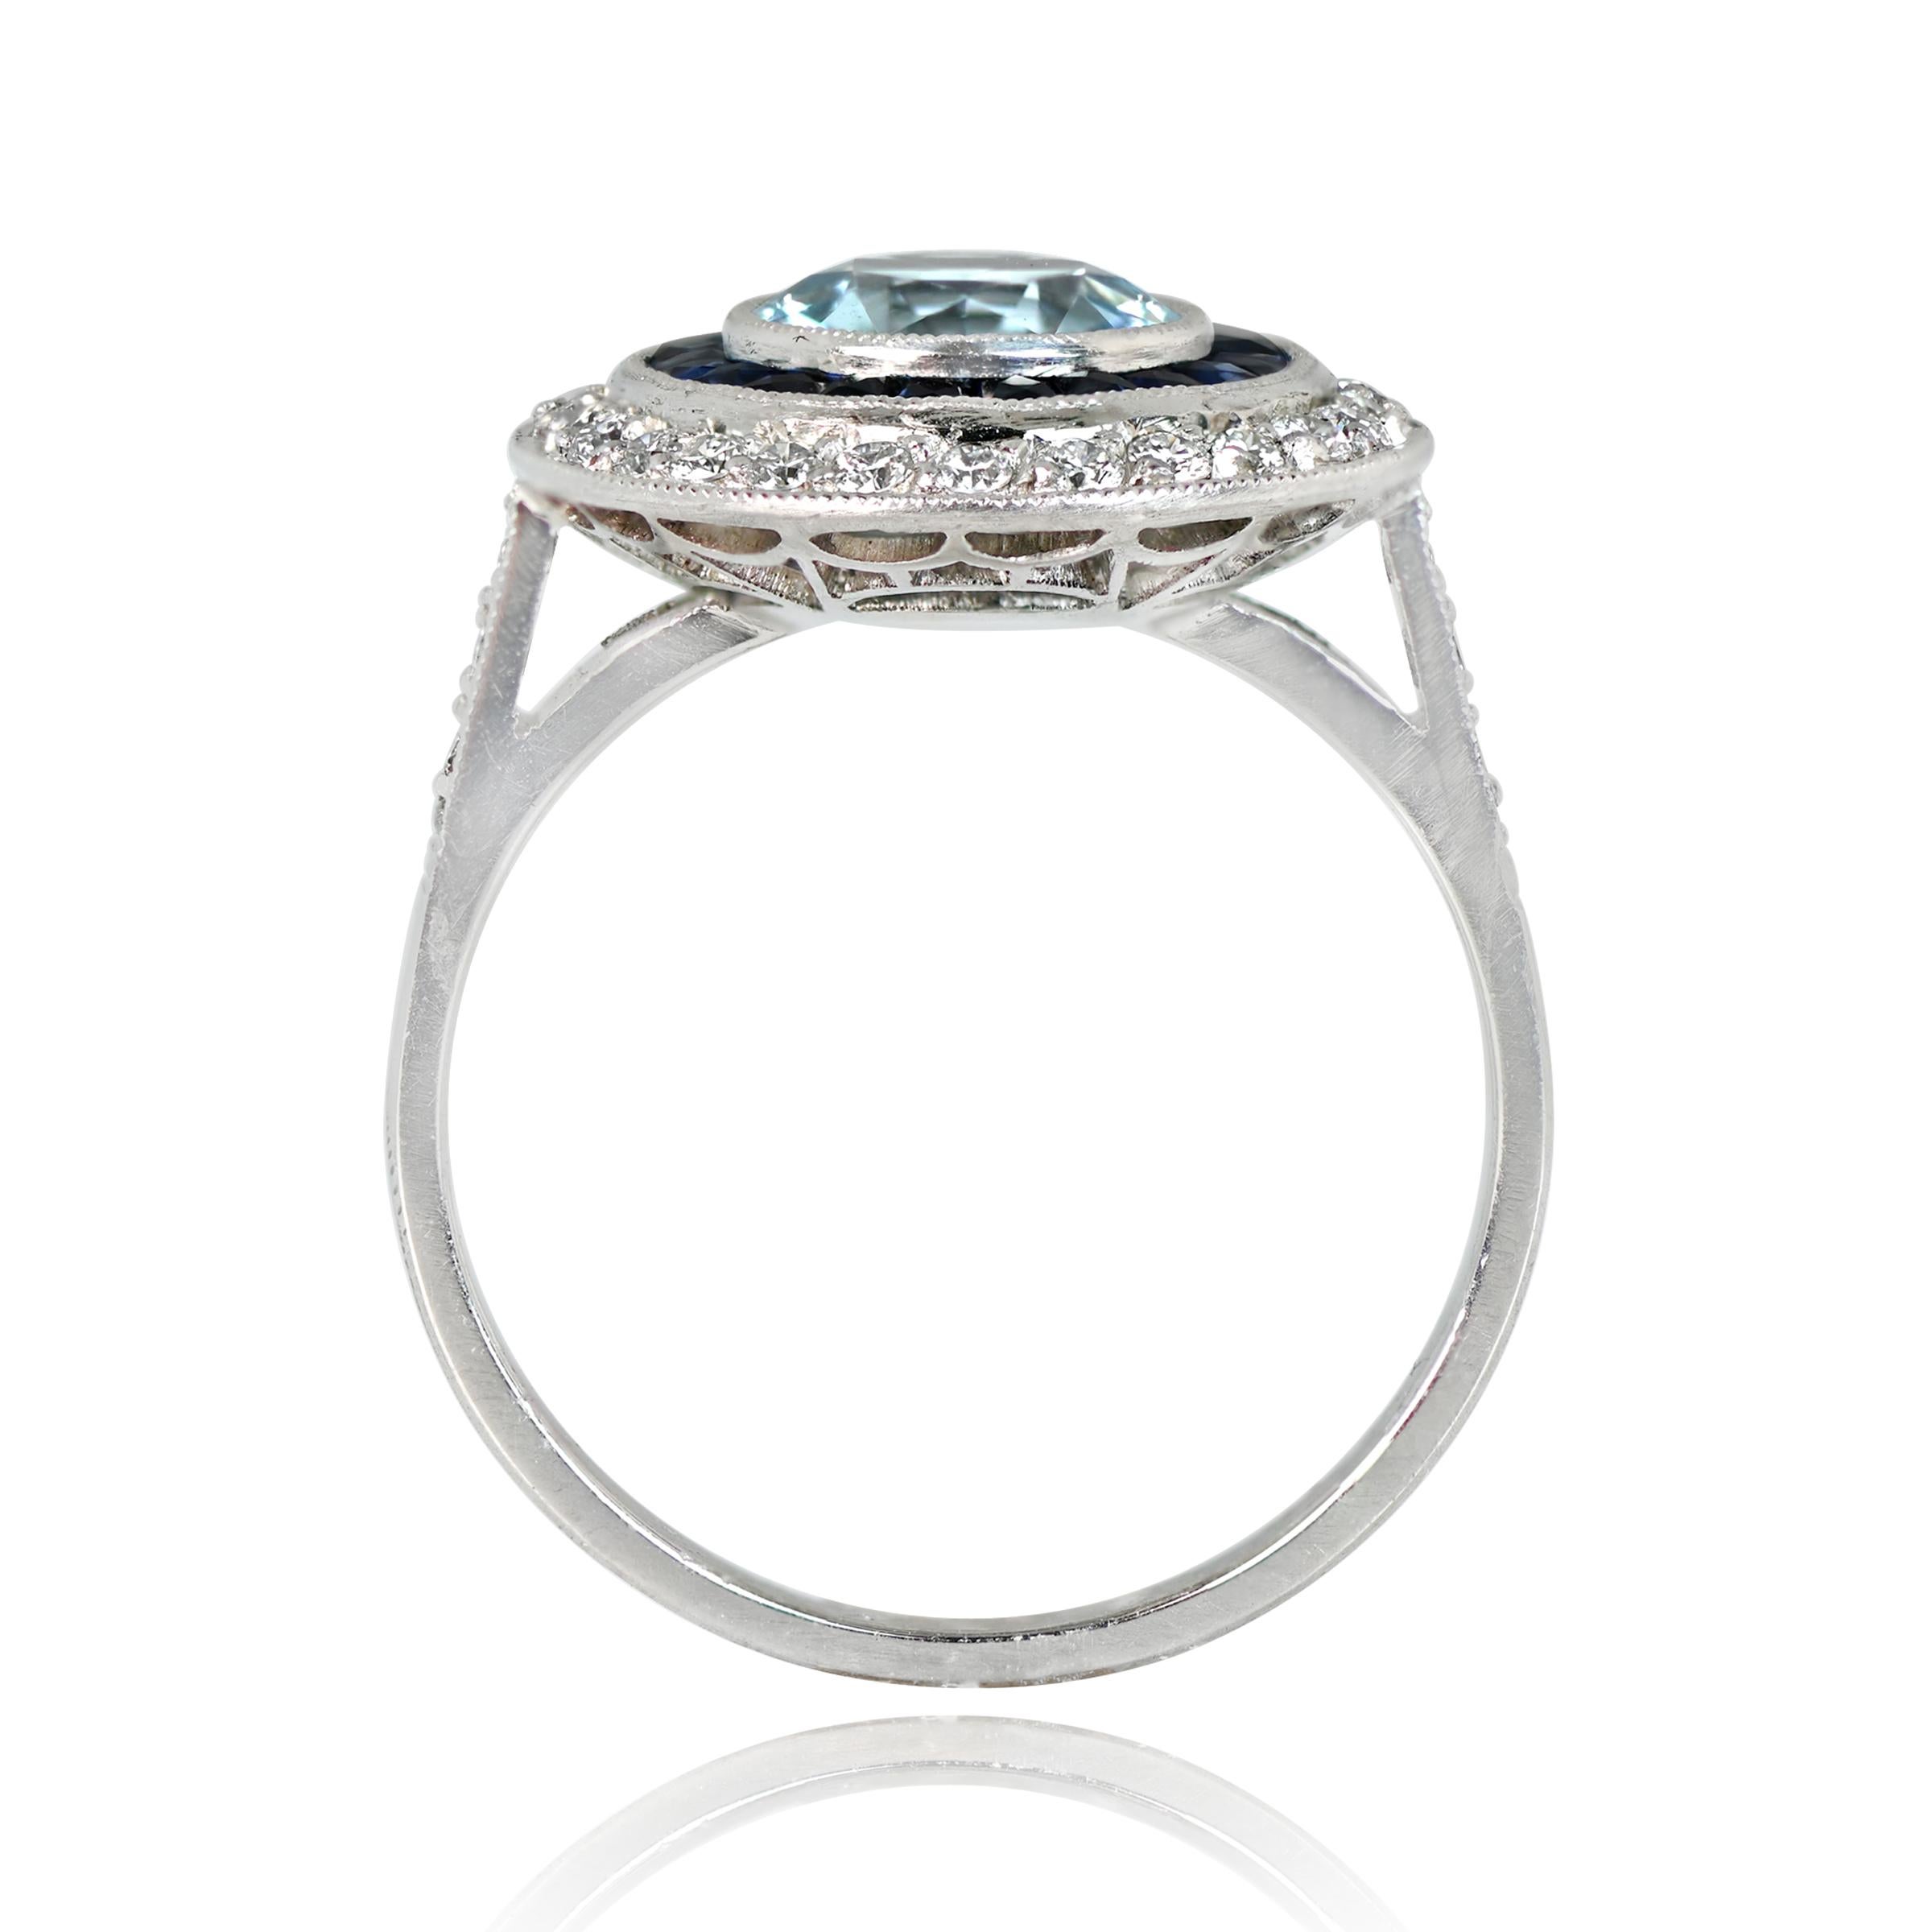 1.00ct Round Cut Aquamarine Engagement Ring, Diamond & Sapphire Halo, Platinum In Excellent Condition For Sale In New York, NY